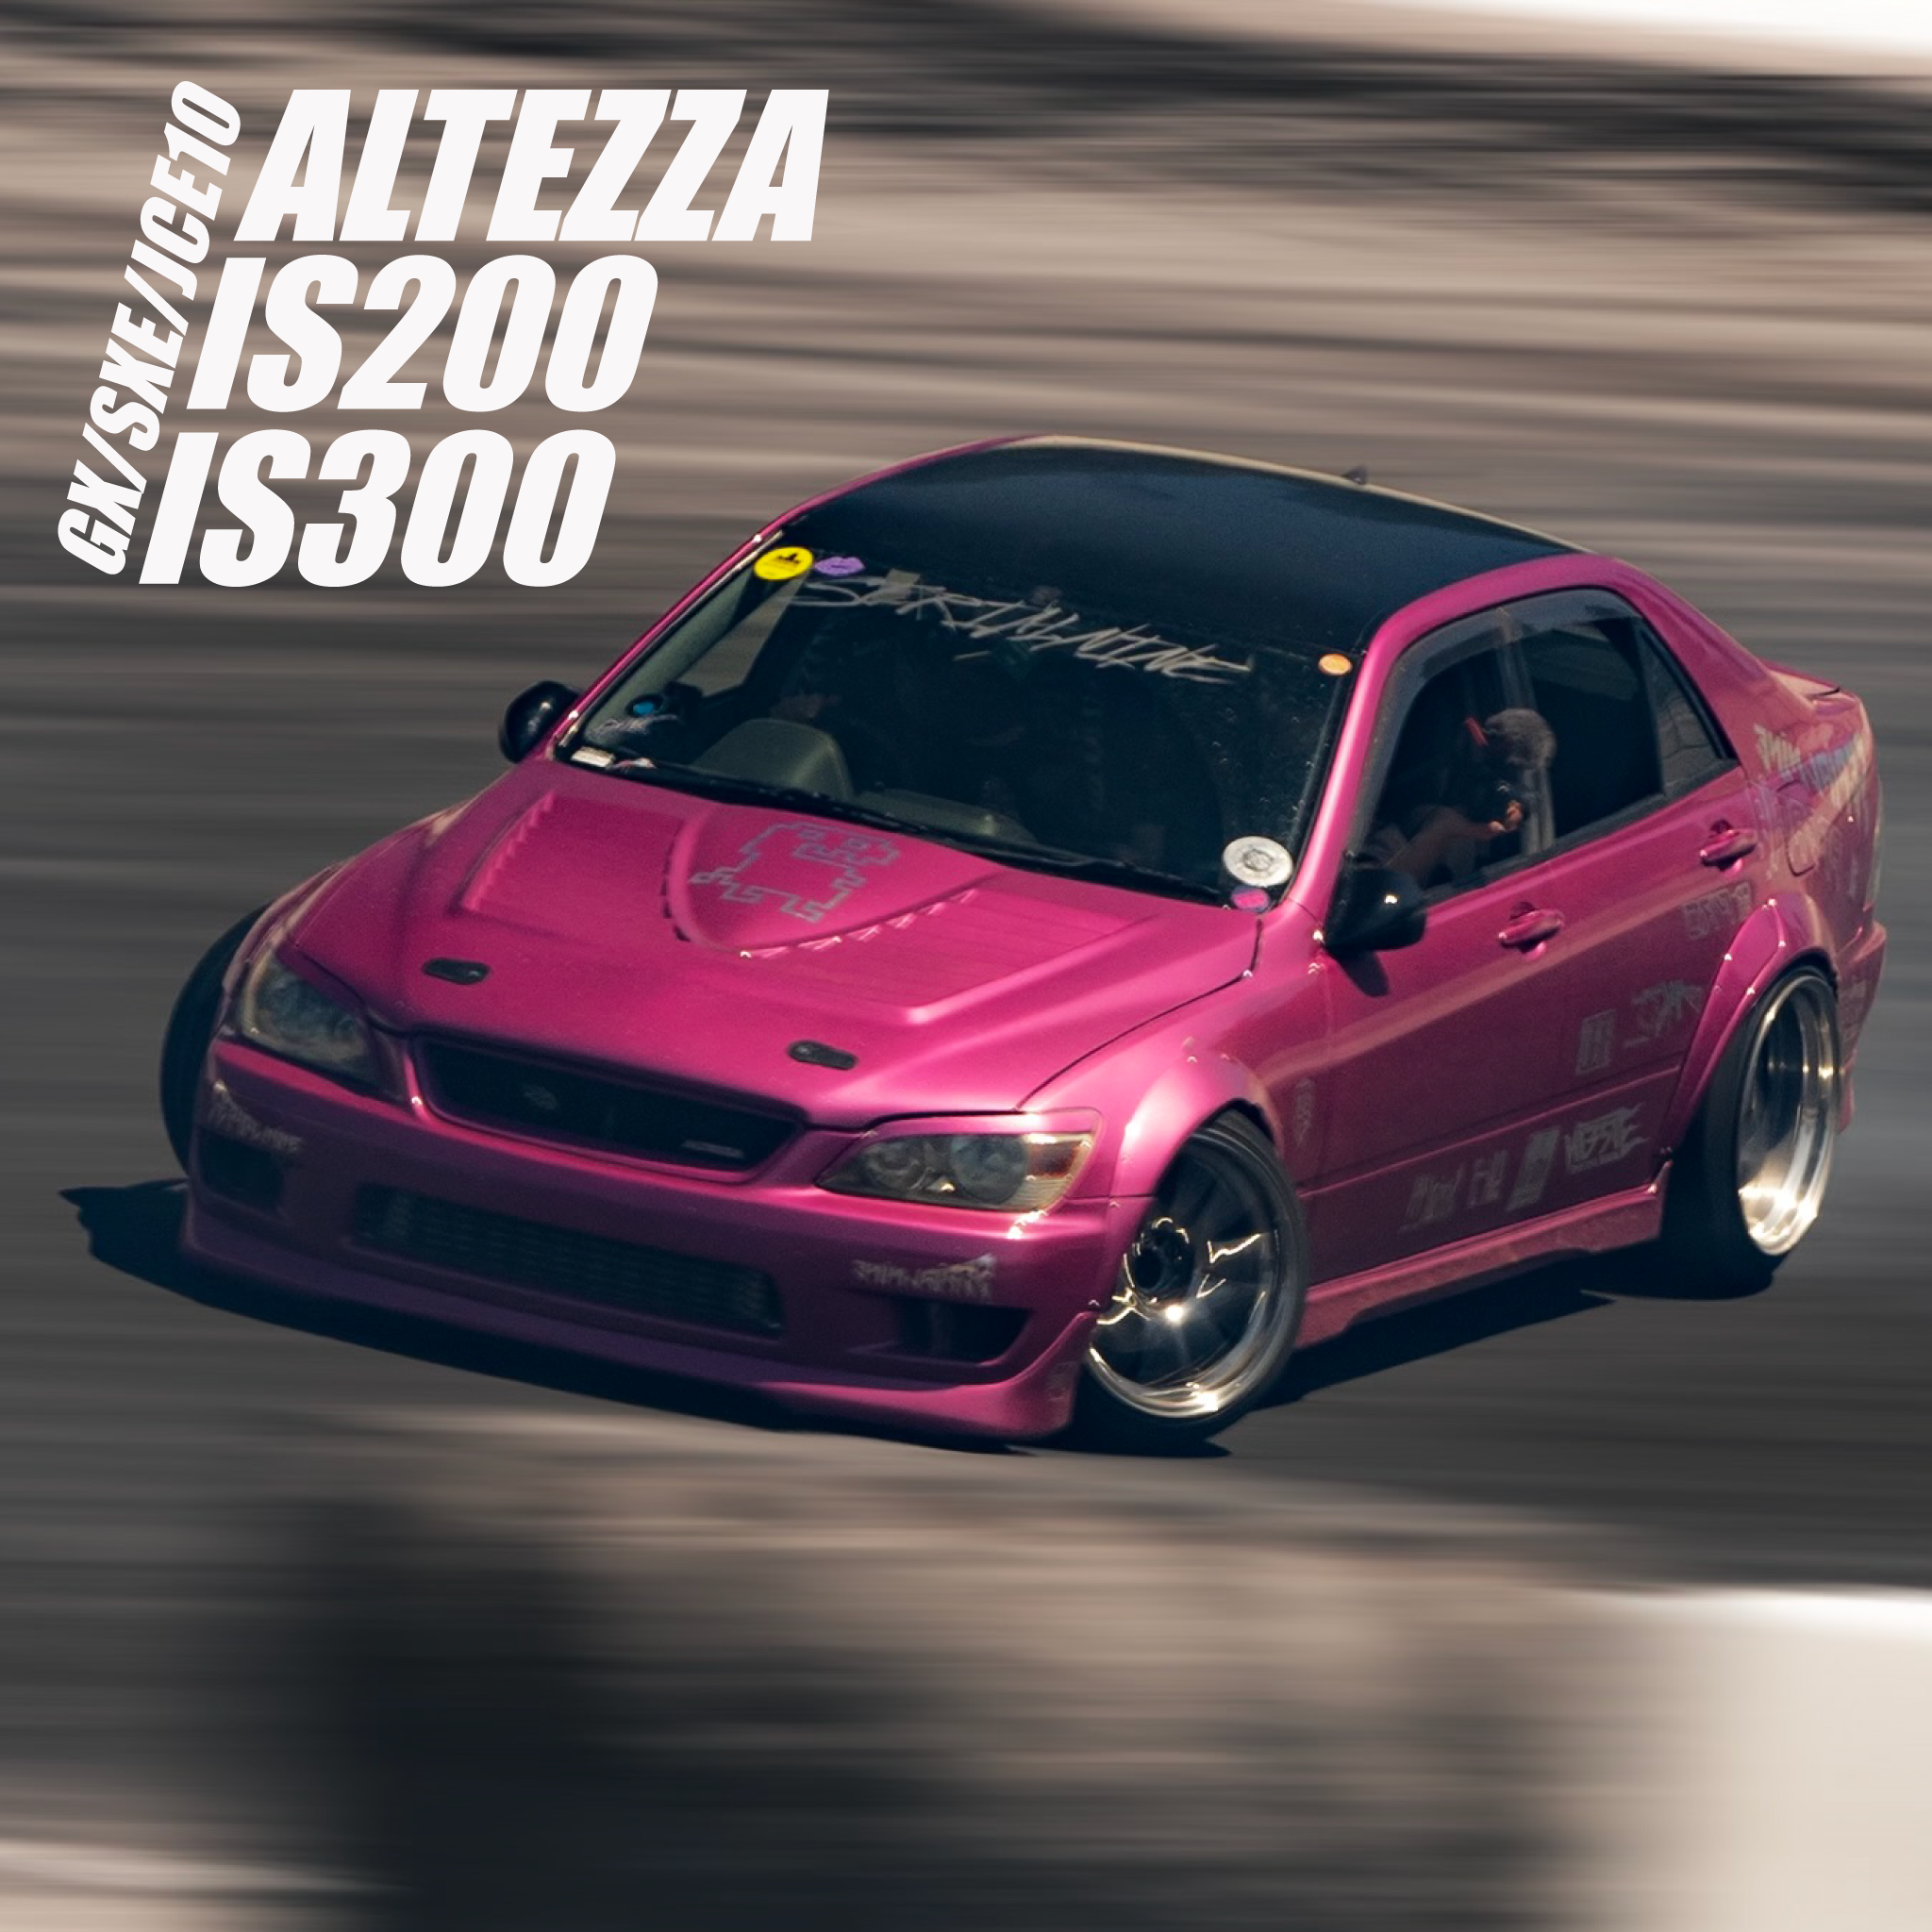  Pink Altezza IS200 or IS300 drifting on a track with 'Altezza IS200 IS300' in bold white text, showcasing dynamic movement. 